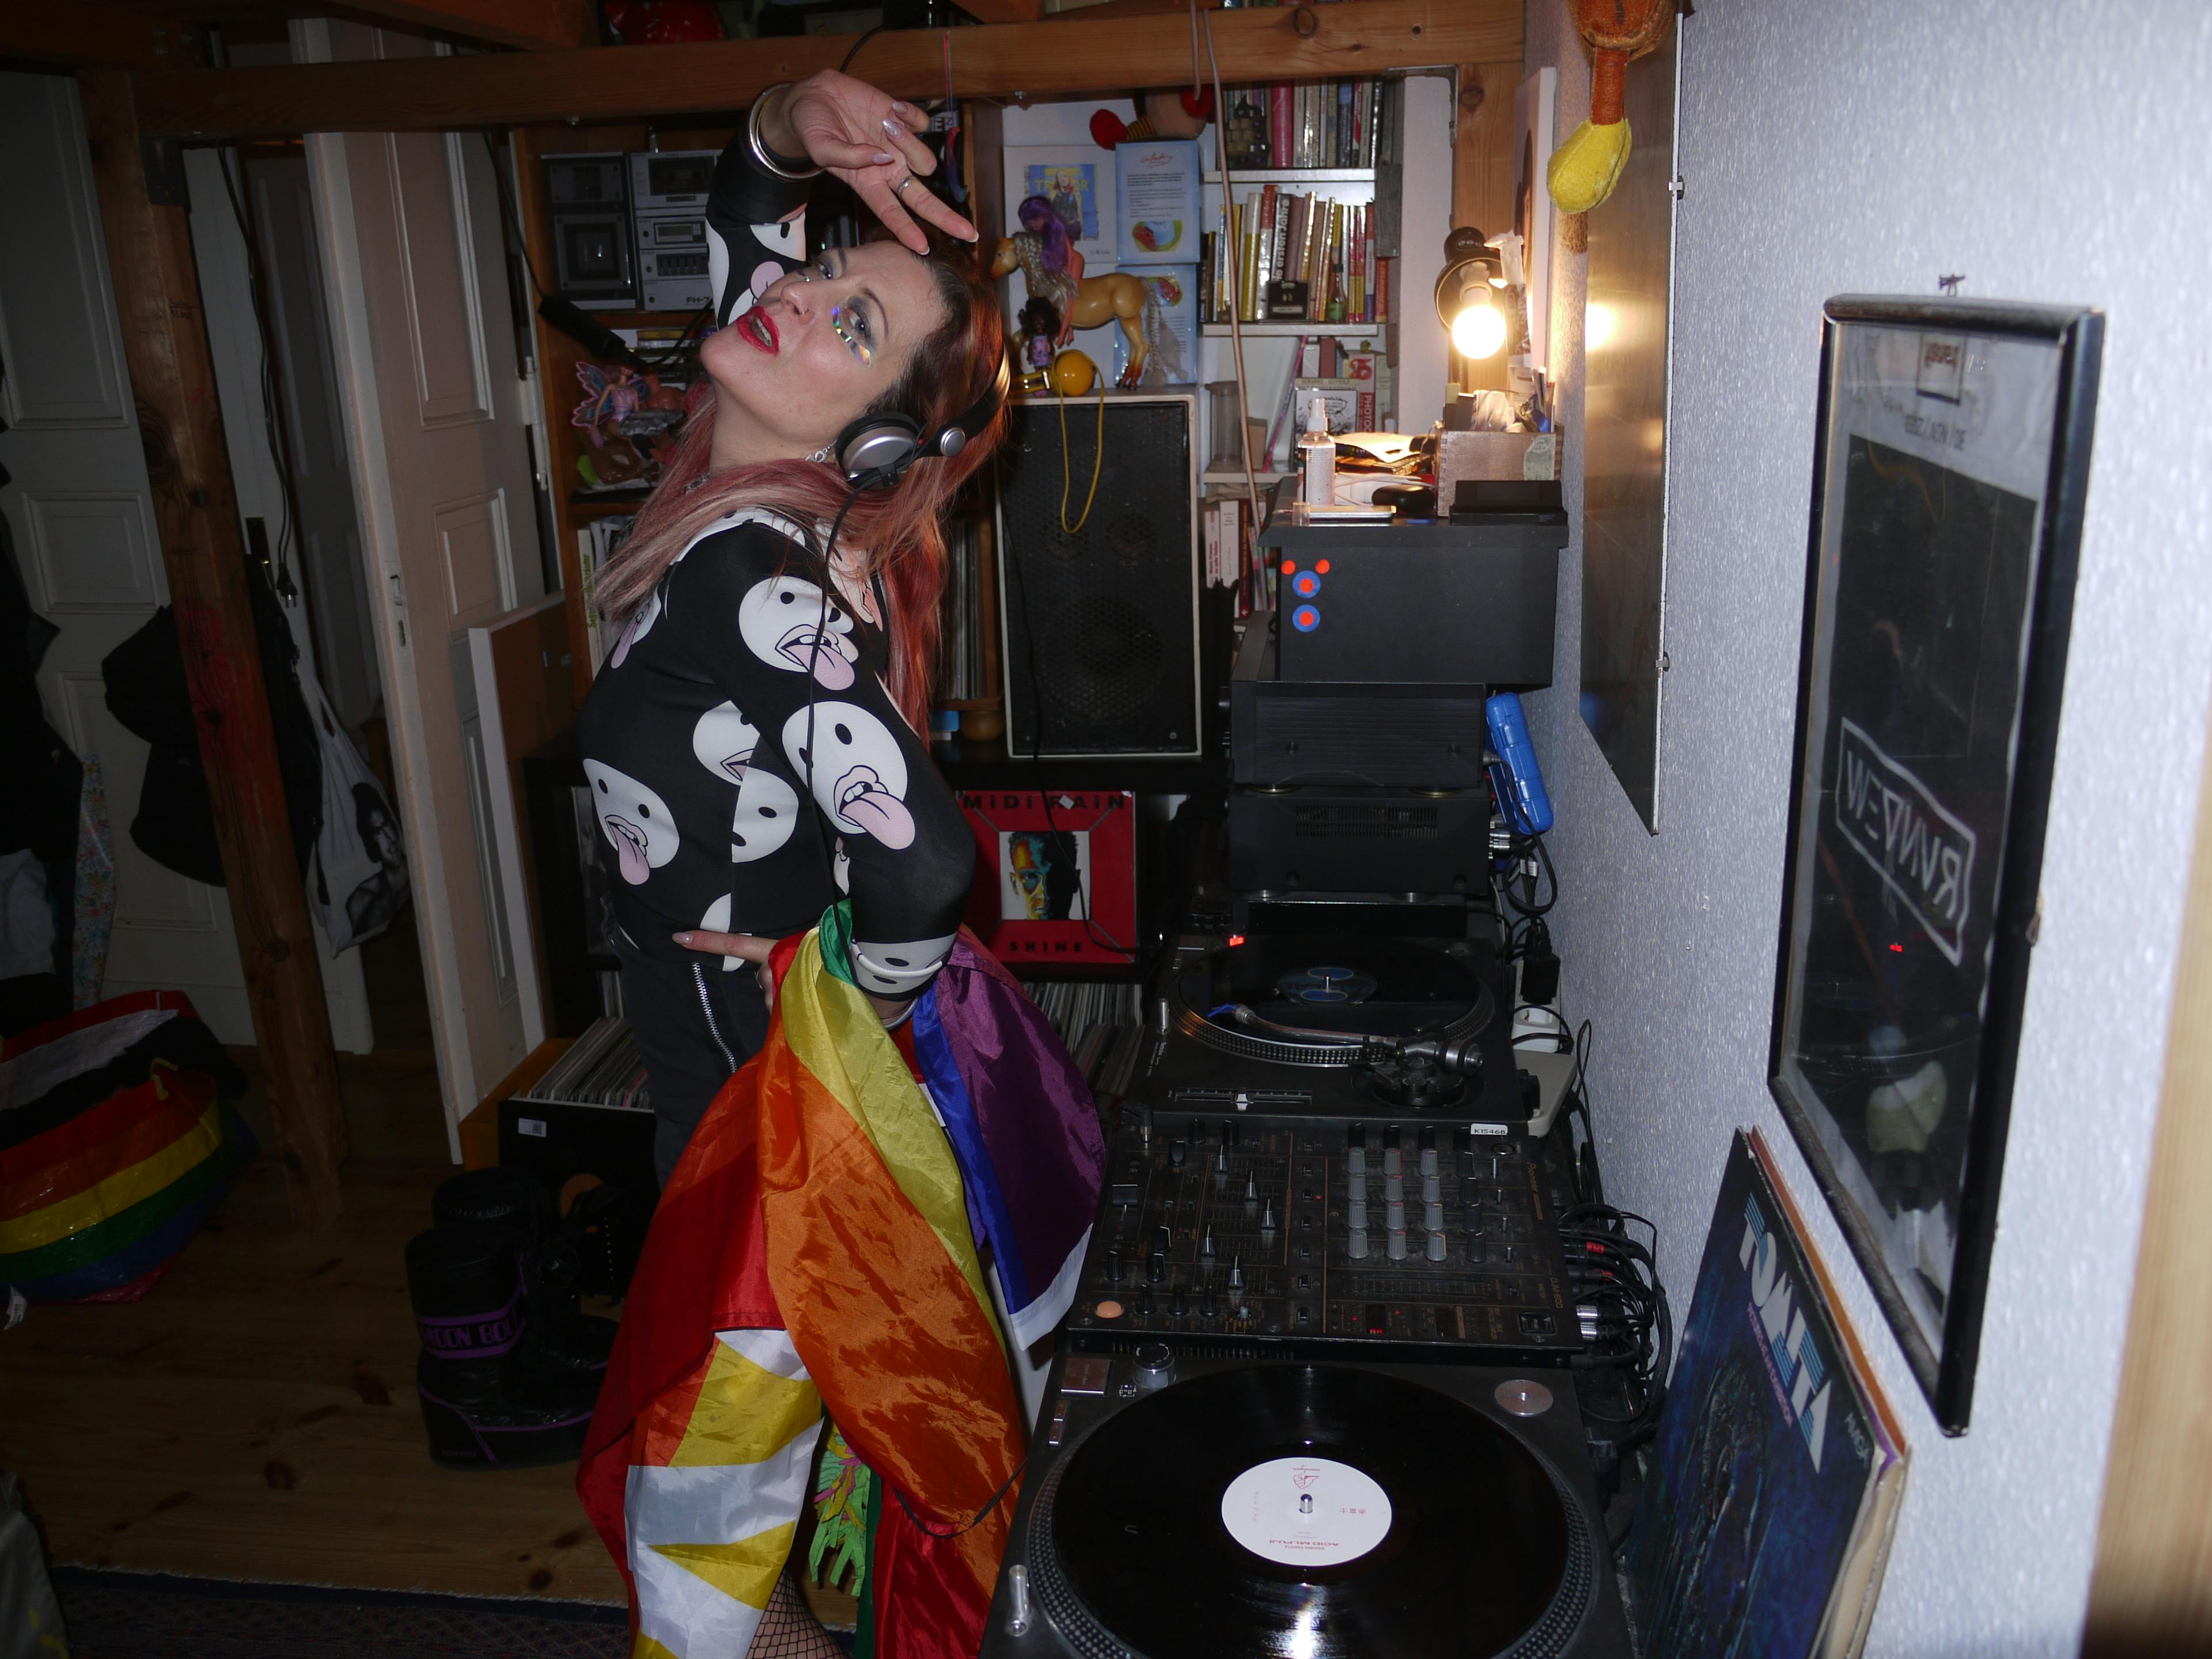 DJ Kat sharing a peace sign with pride flag and turntable